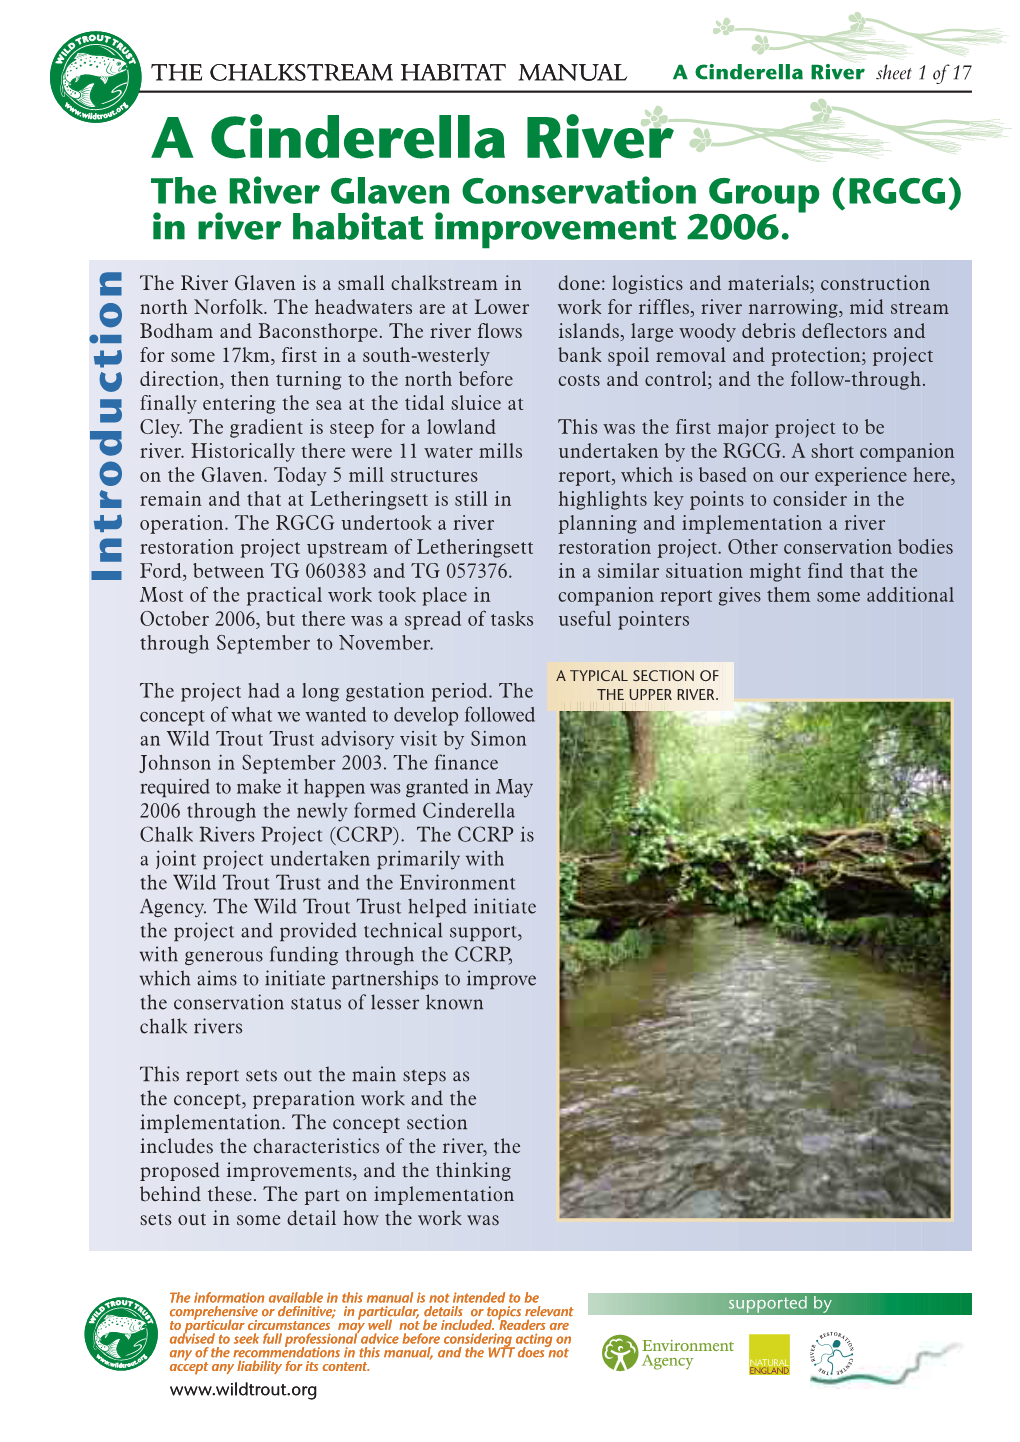 The River Glaven Conservation Group (RGCG) in River Habitat Improvement 2006